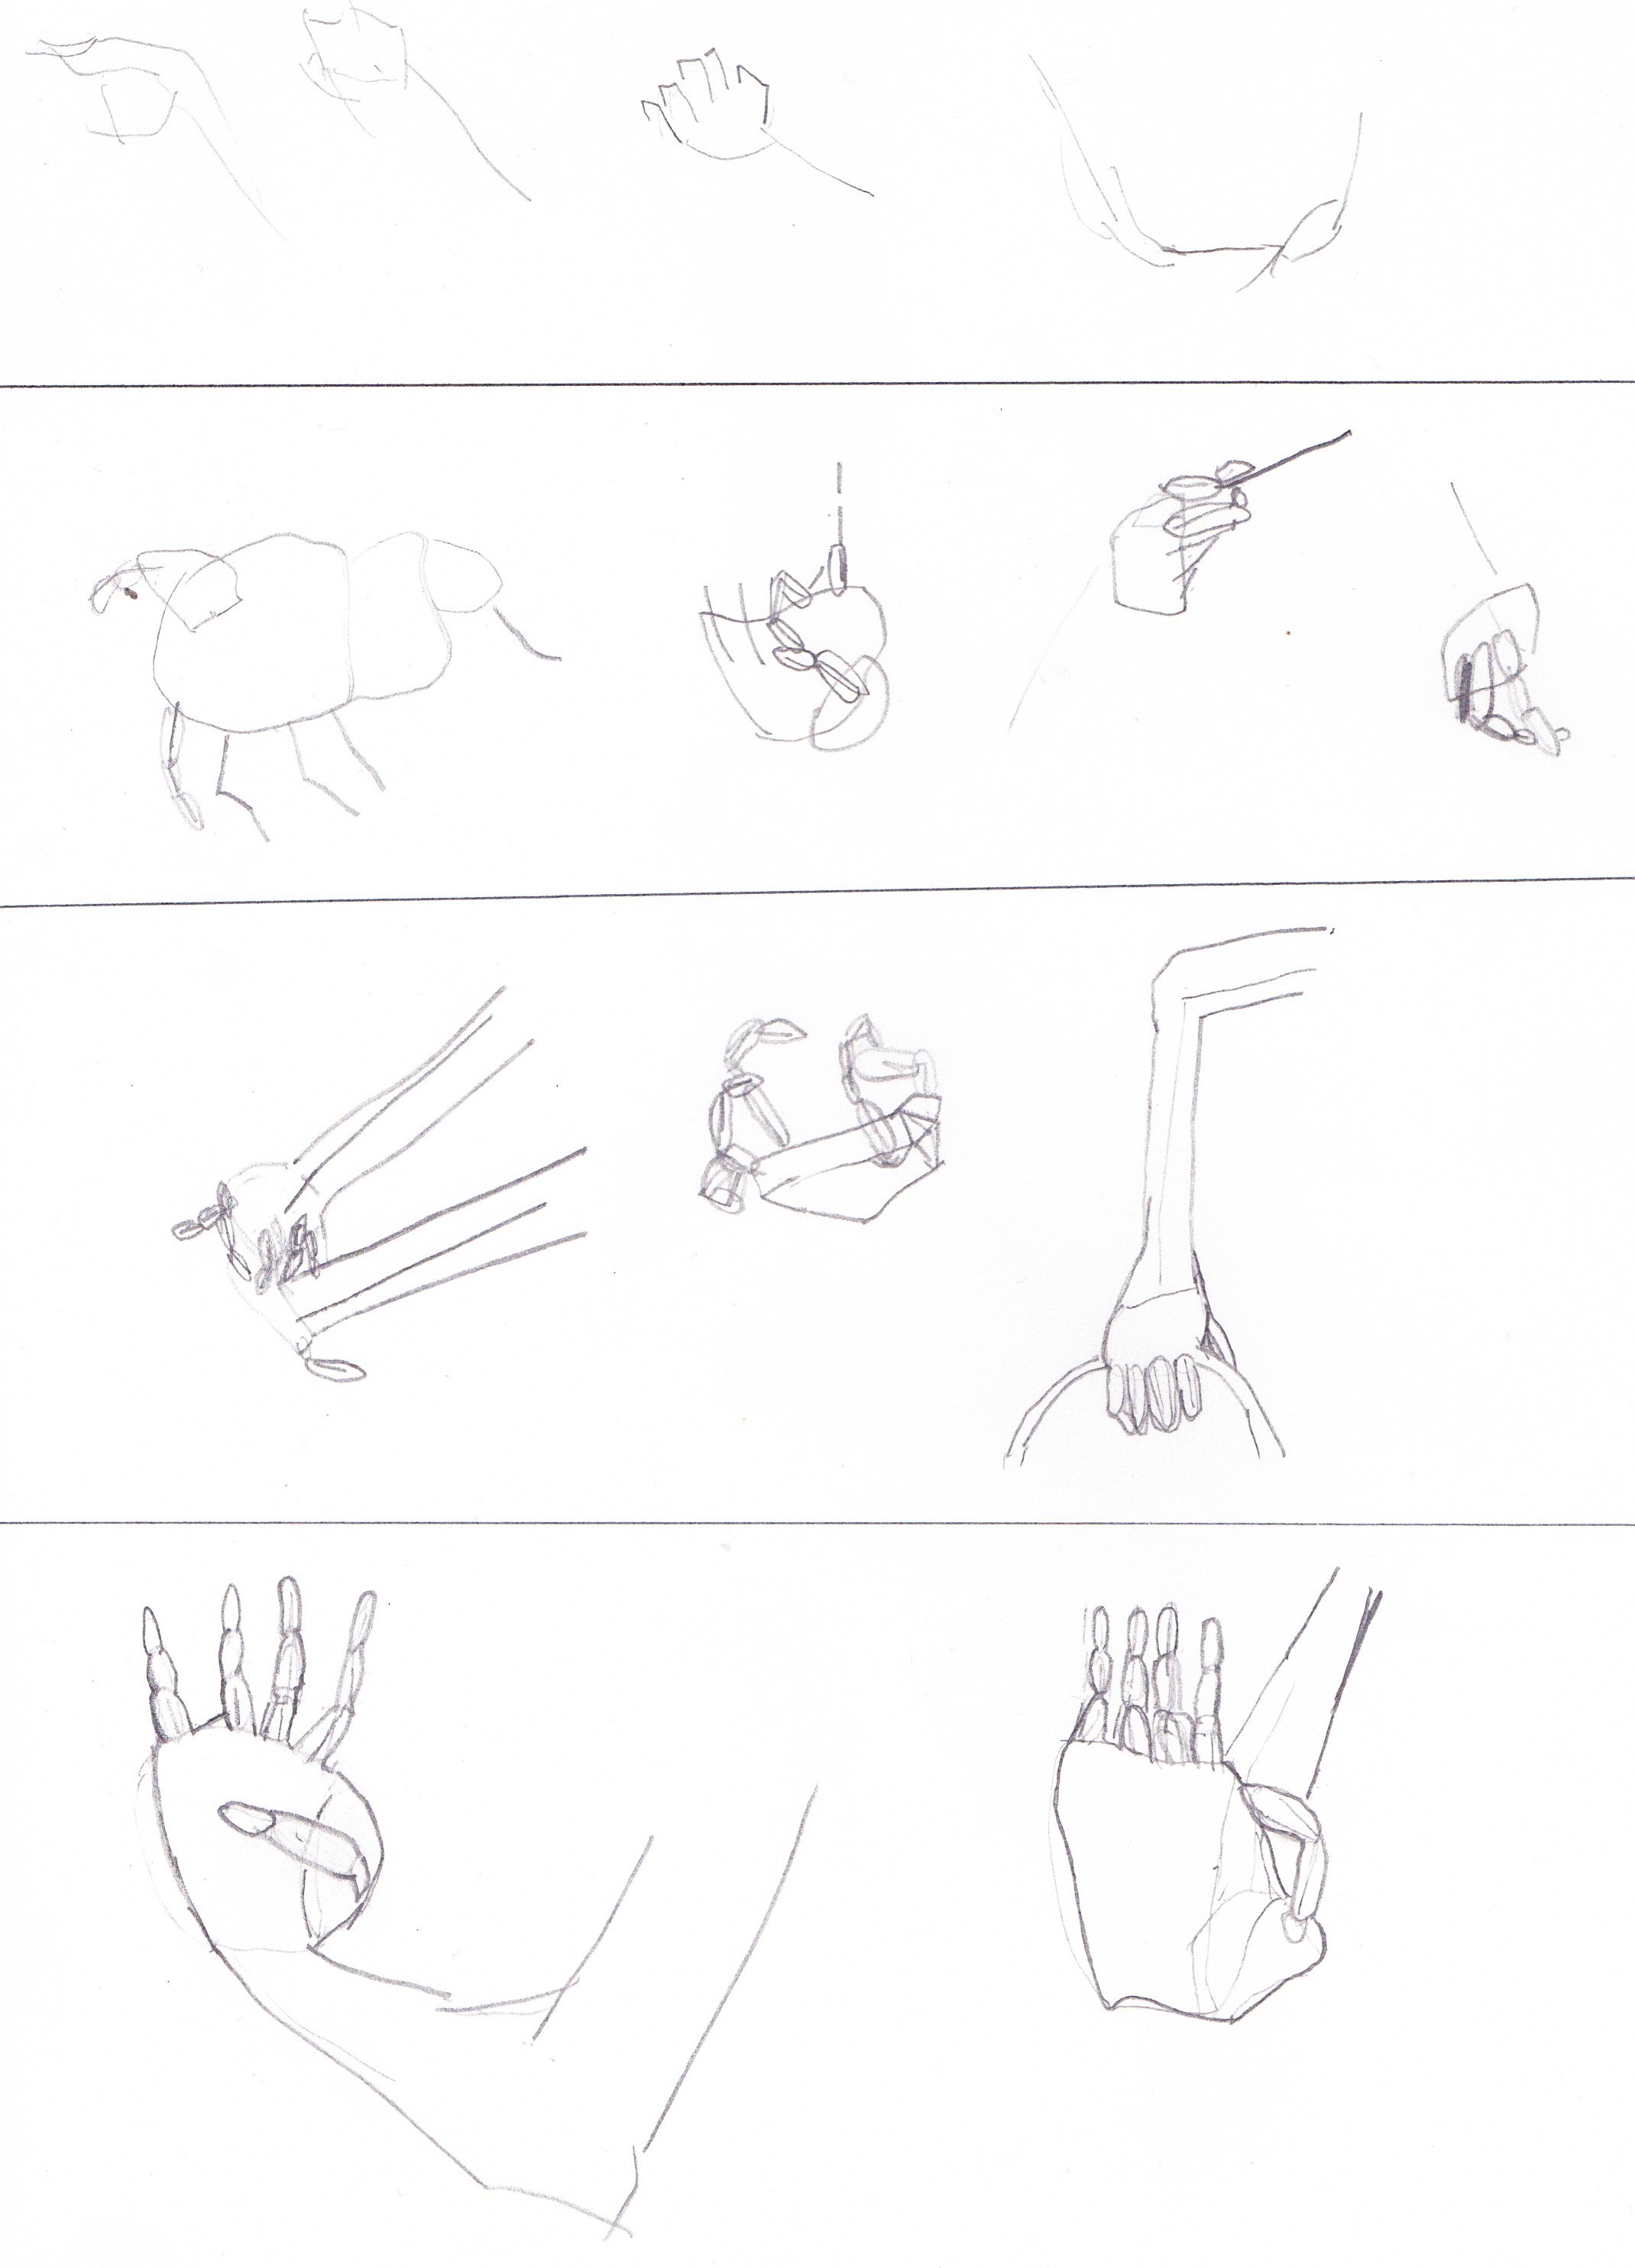 Hands - Day 322 - Learning to Draw